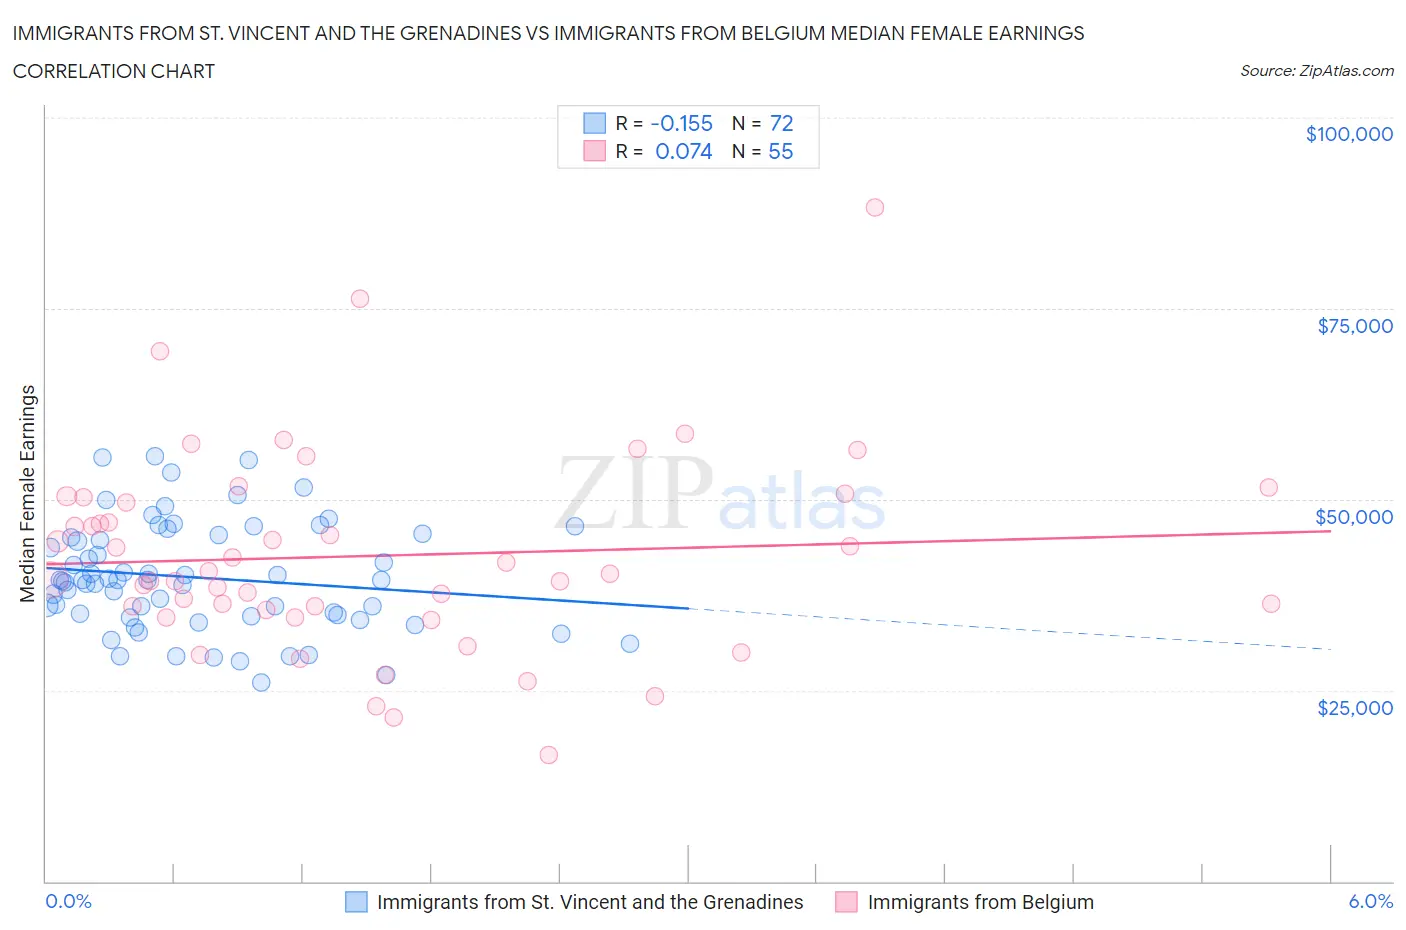 Immigrants from St. Vincent and the Grenadines vs Immigrants from Belgium Median Female Earnings